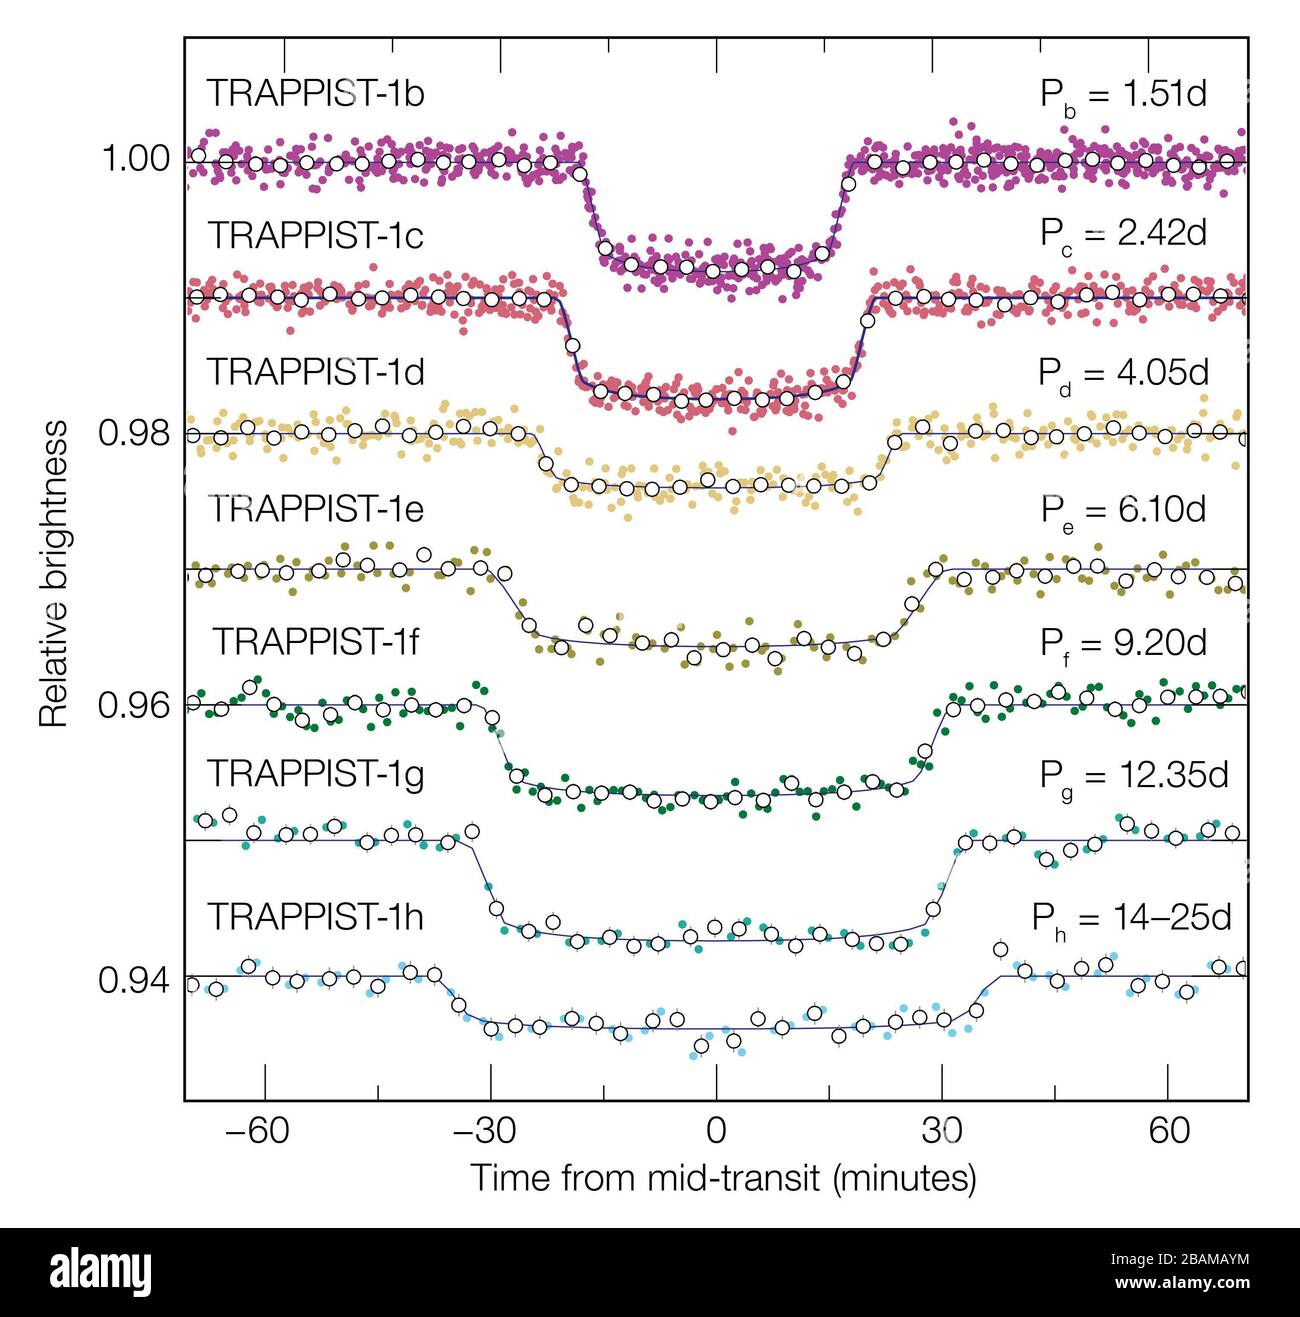 'English: This diagram shows how the light of the dim red ultra cool dwarf star TRAPPIST-1 fades as each of its seven known planets passes in front of it and blocks some of its light. The larger planets create deeper dips and the more distance ones have longer lasting transits as they are orbiting more slowly. These data were obtained from observations made with the NASA Spitzer Space Telescope. Español: Este diagrama muestra cómo la luz de la tenue estrella enana roja ultrafría TRAPPIST-1 disminuye a medida que cada uno de sus siete planetas conocidos pasa por delante de ella y bloquea parte Stock Photo